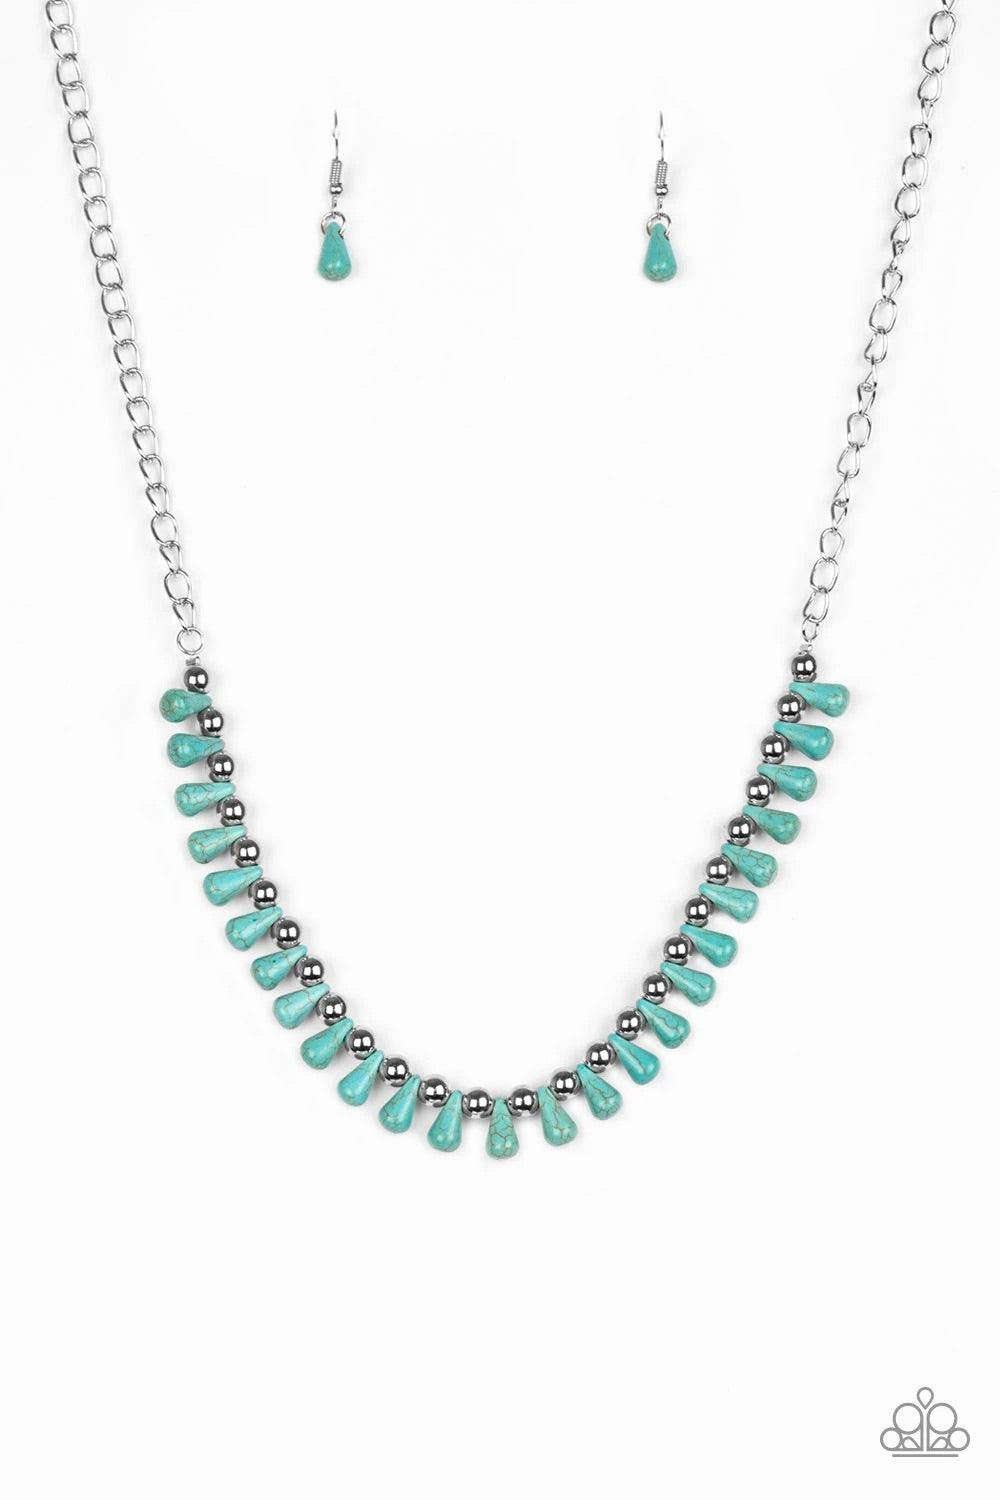 Paparazzi Accessories Extinct Species - Blue Turquoise teardrop stones and classic silver beads are threaded along an invisible wire. The earthy beads alternate below the collar, creating a wild fringe. Features an adjustable clasp closure. Sold as one in